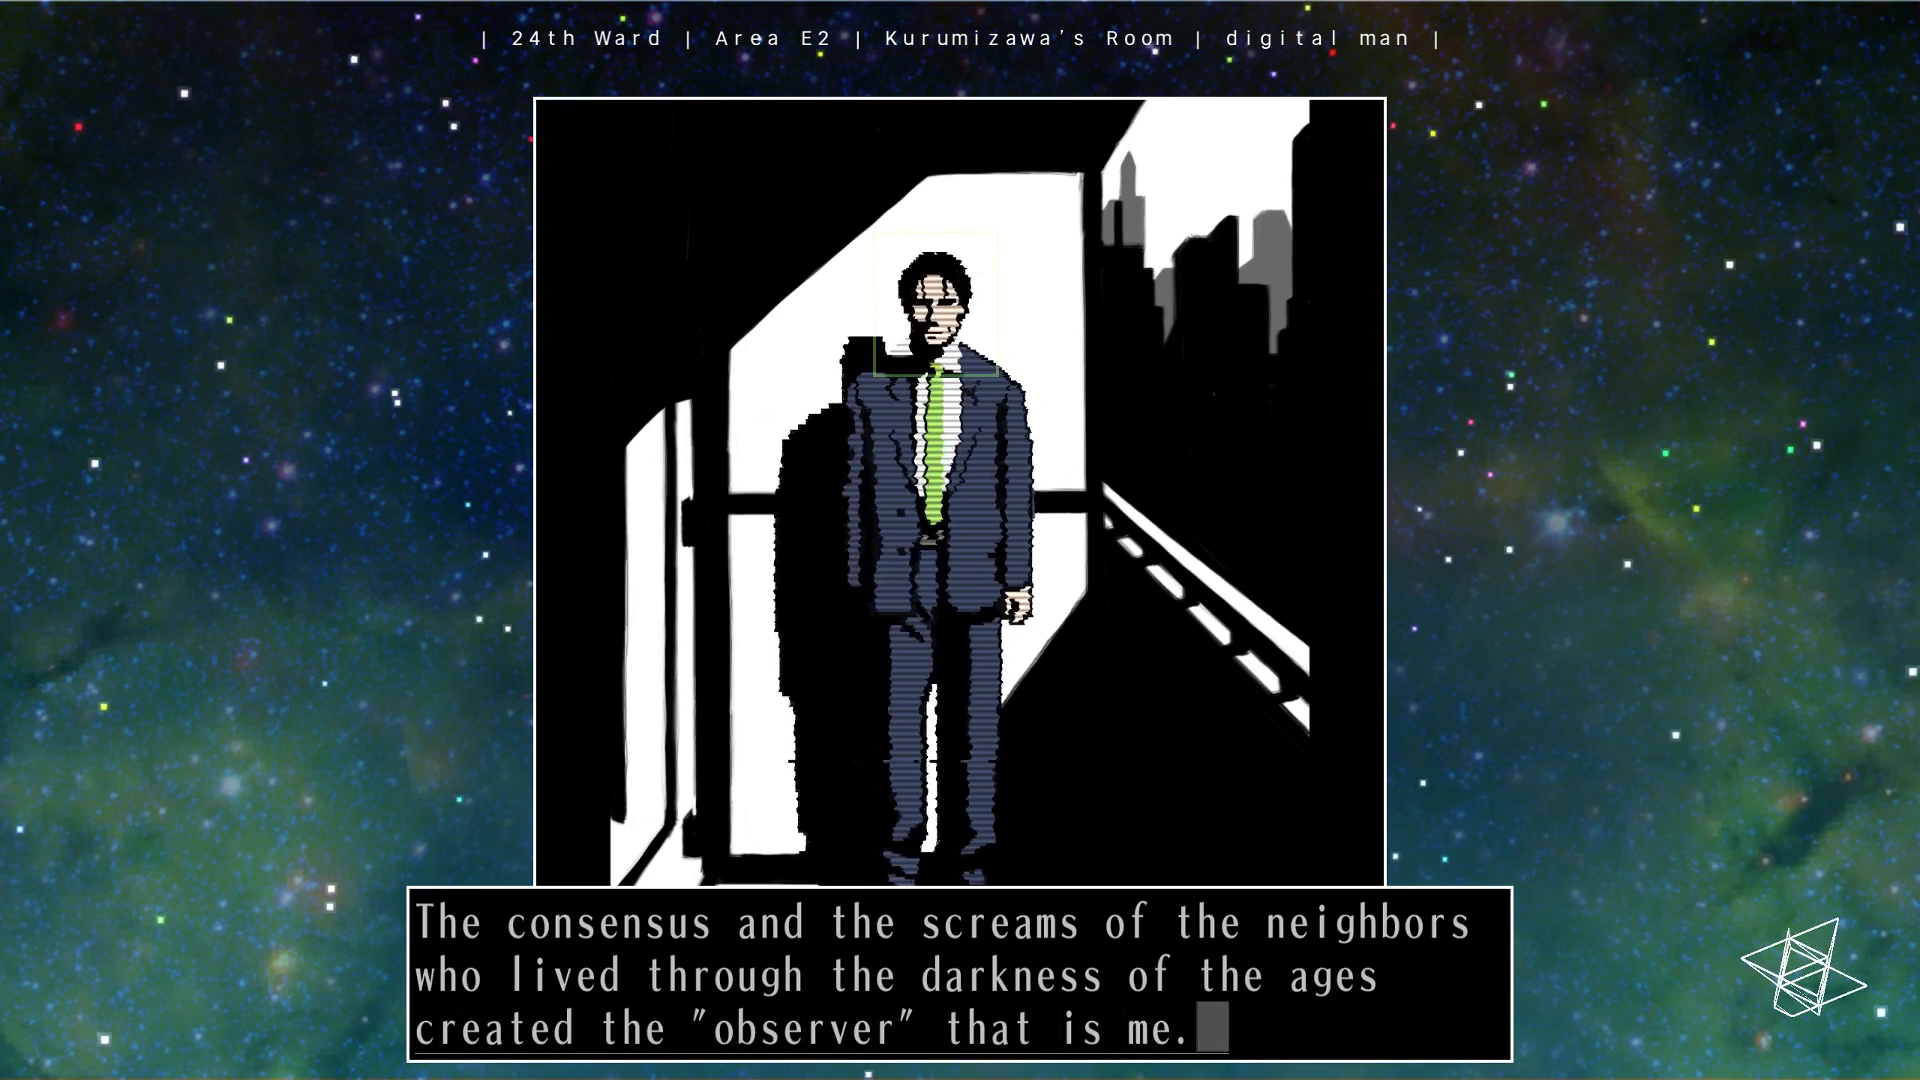 Screenshot from "digital man." Kurumizawa stands on the balcony of his apartment. He resembles a projection on a CRT screen, a totally different visual style than the rest of the world around him. He says, "The consensus and the screams of the neighbors who lived through the darkness of the ages created the 'observer' that is me."